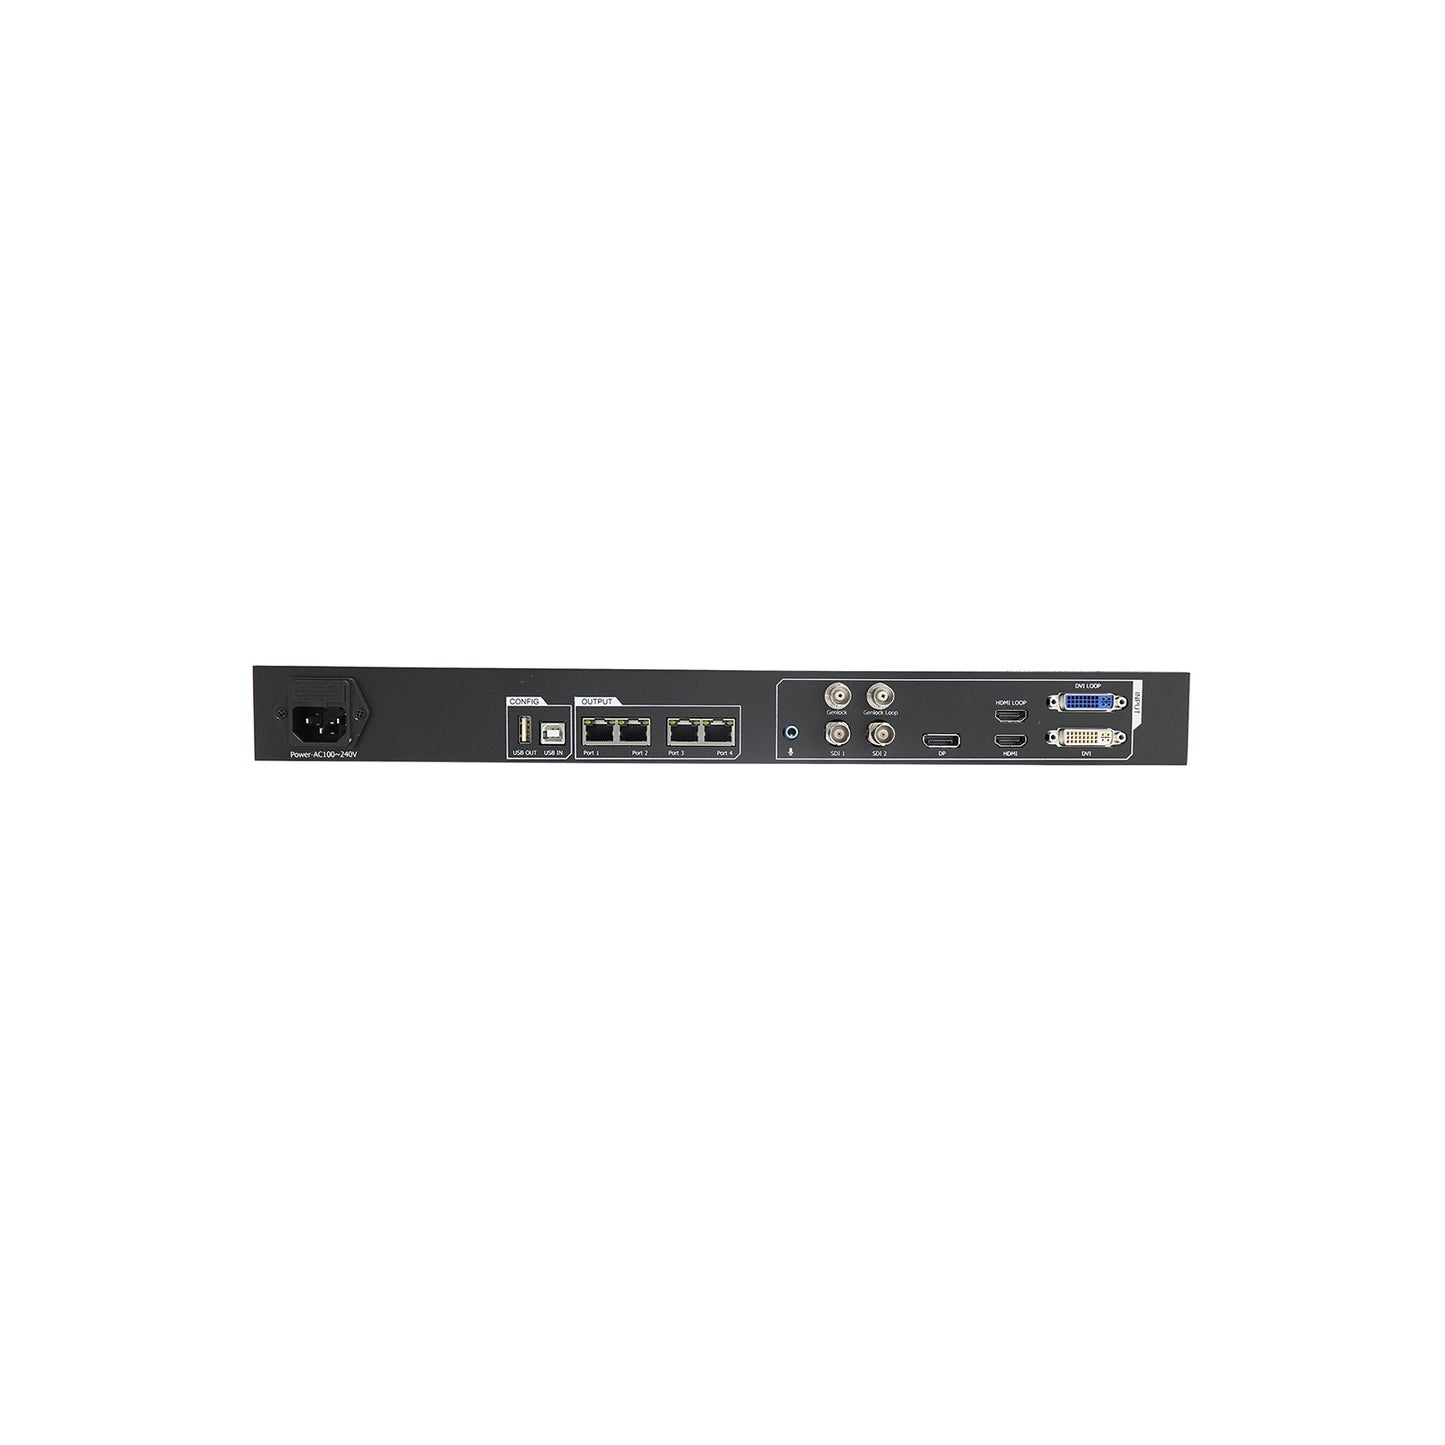 X4E Two-in-one LED Video Processor